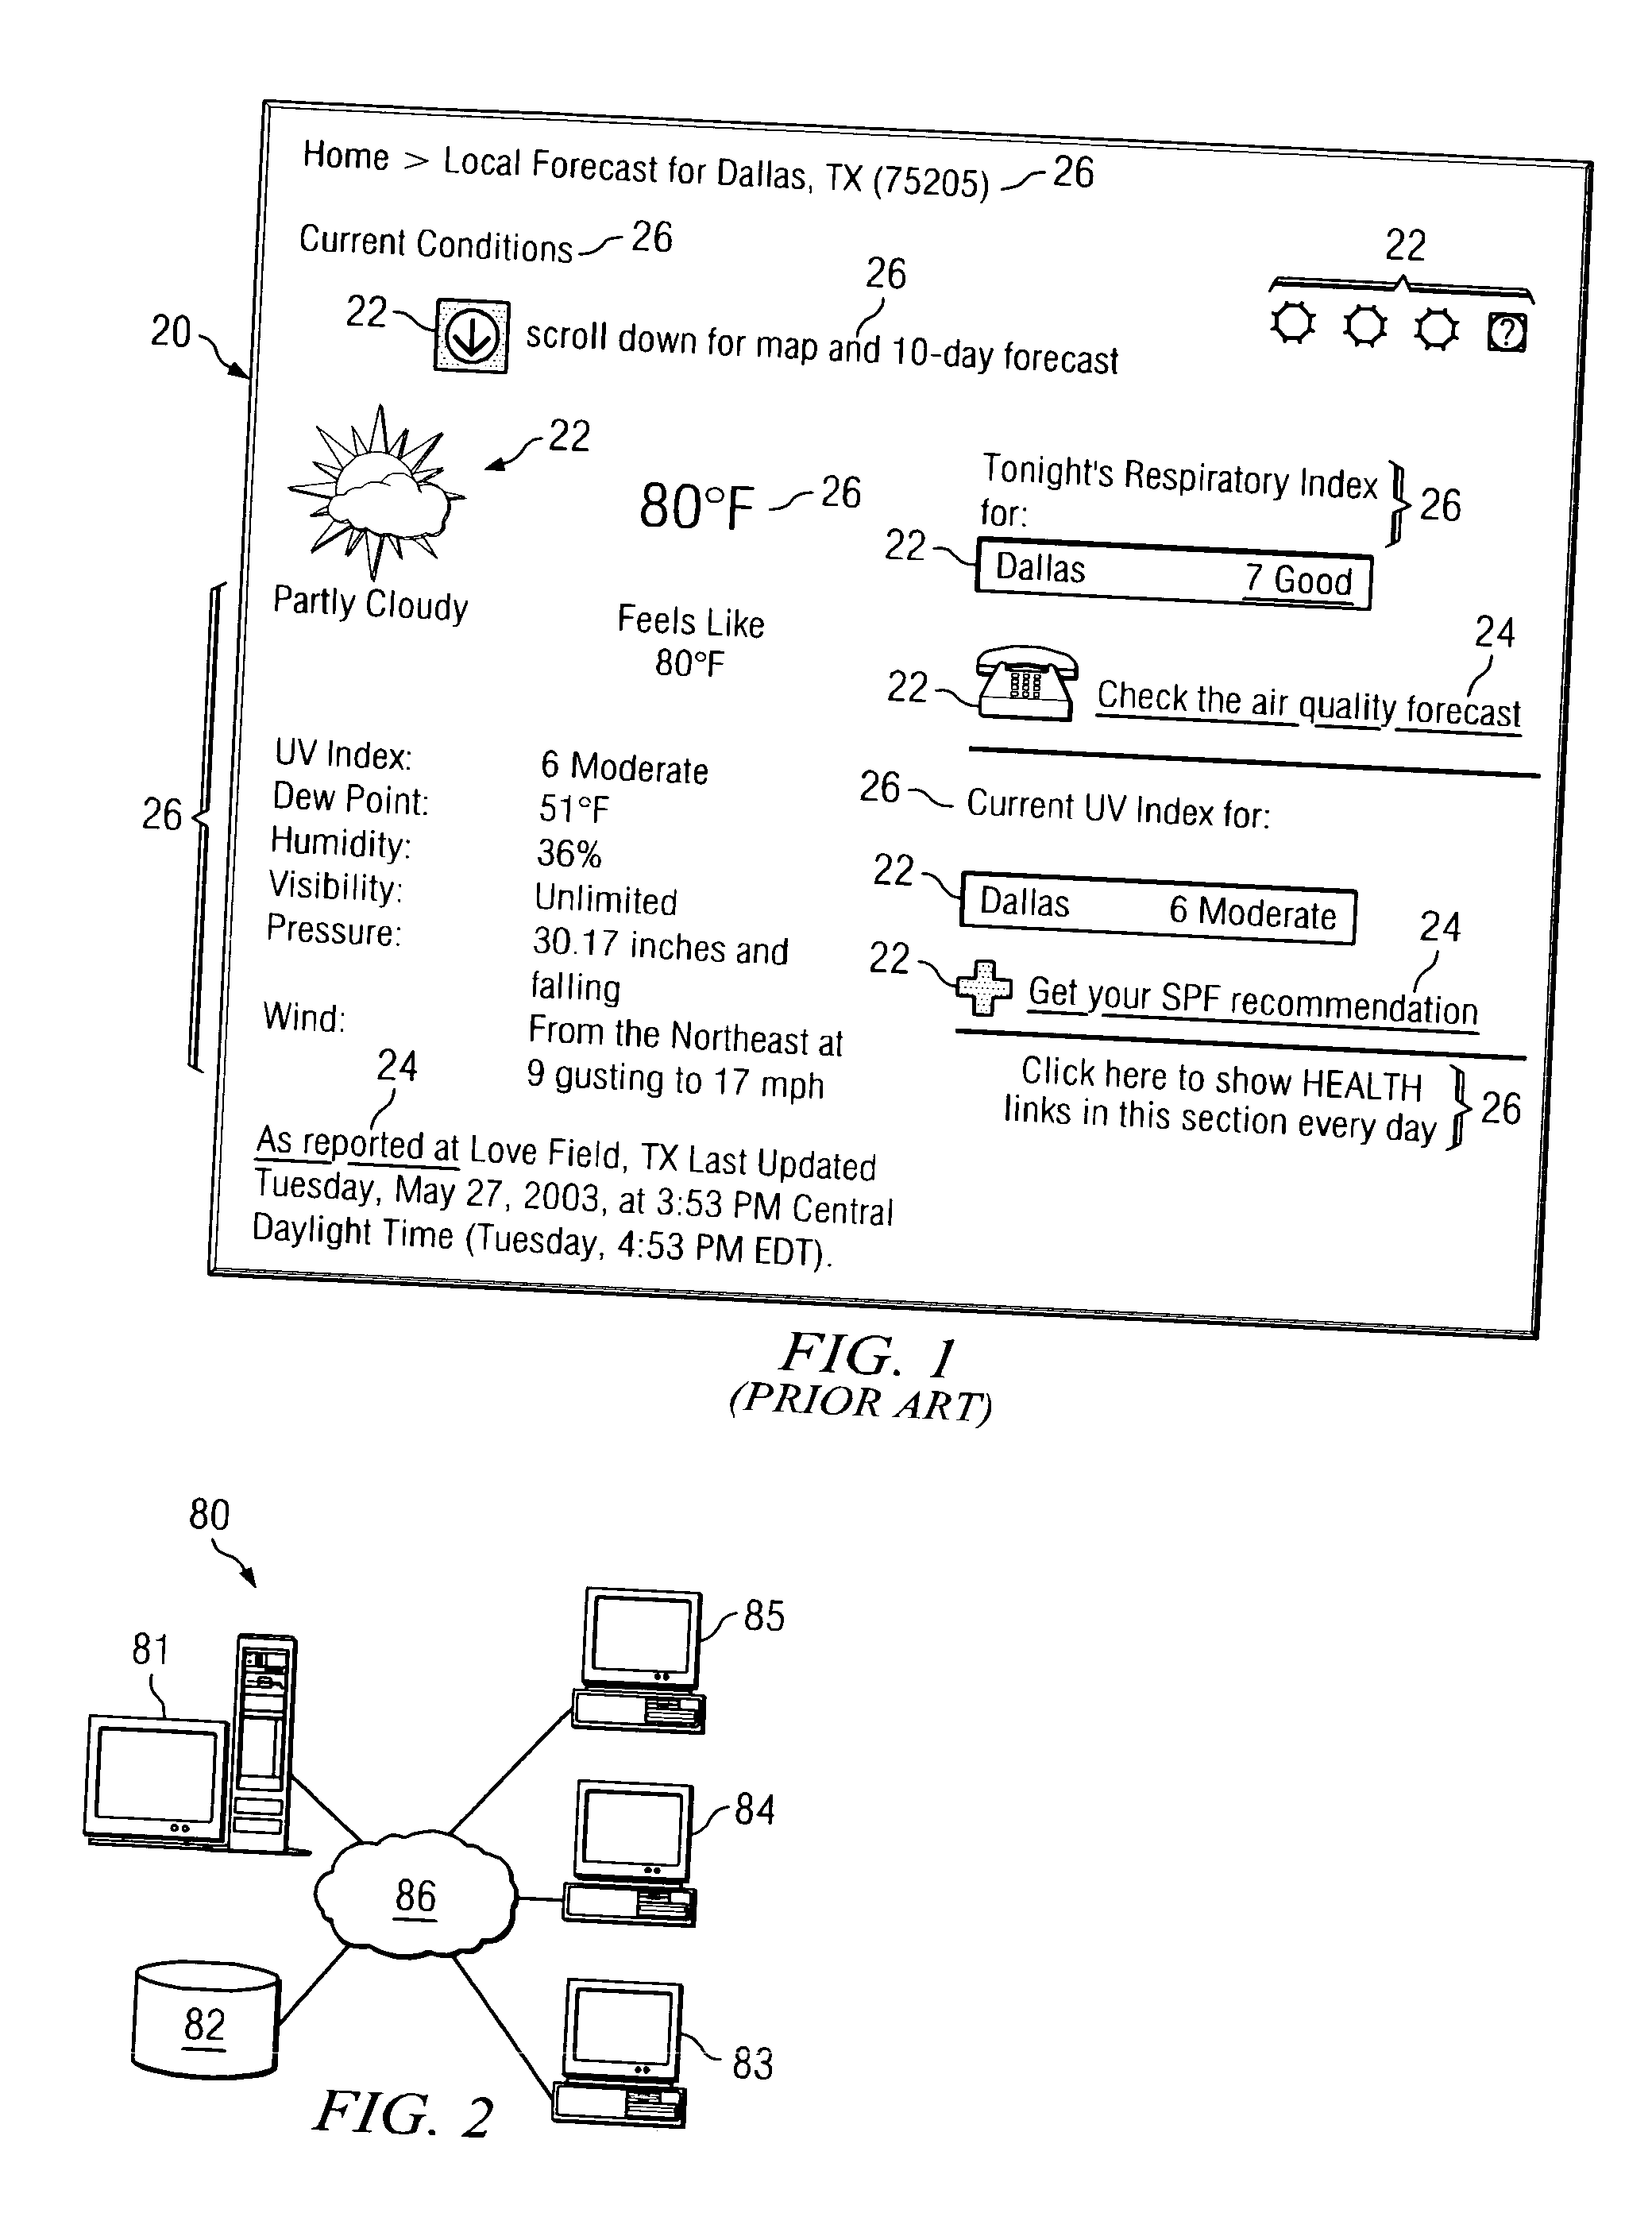 Apparatus and method for distributing portions of large web pages to fit smaller constrained viewing areas